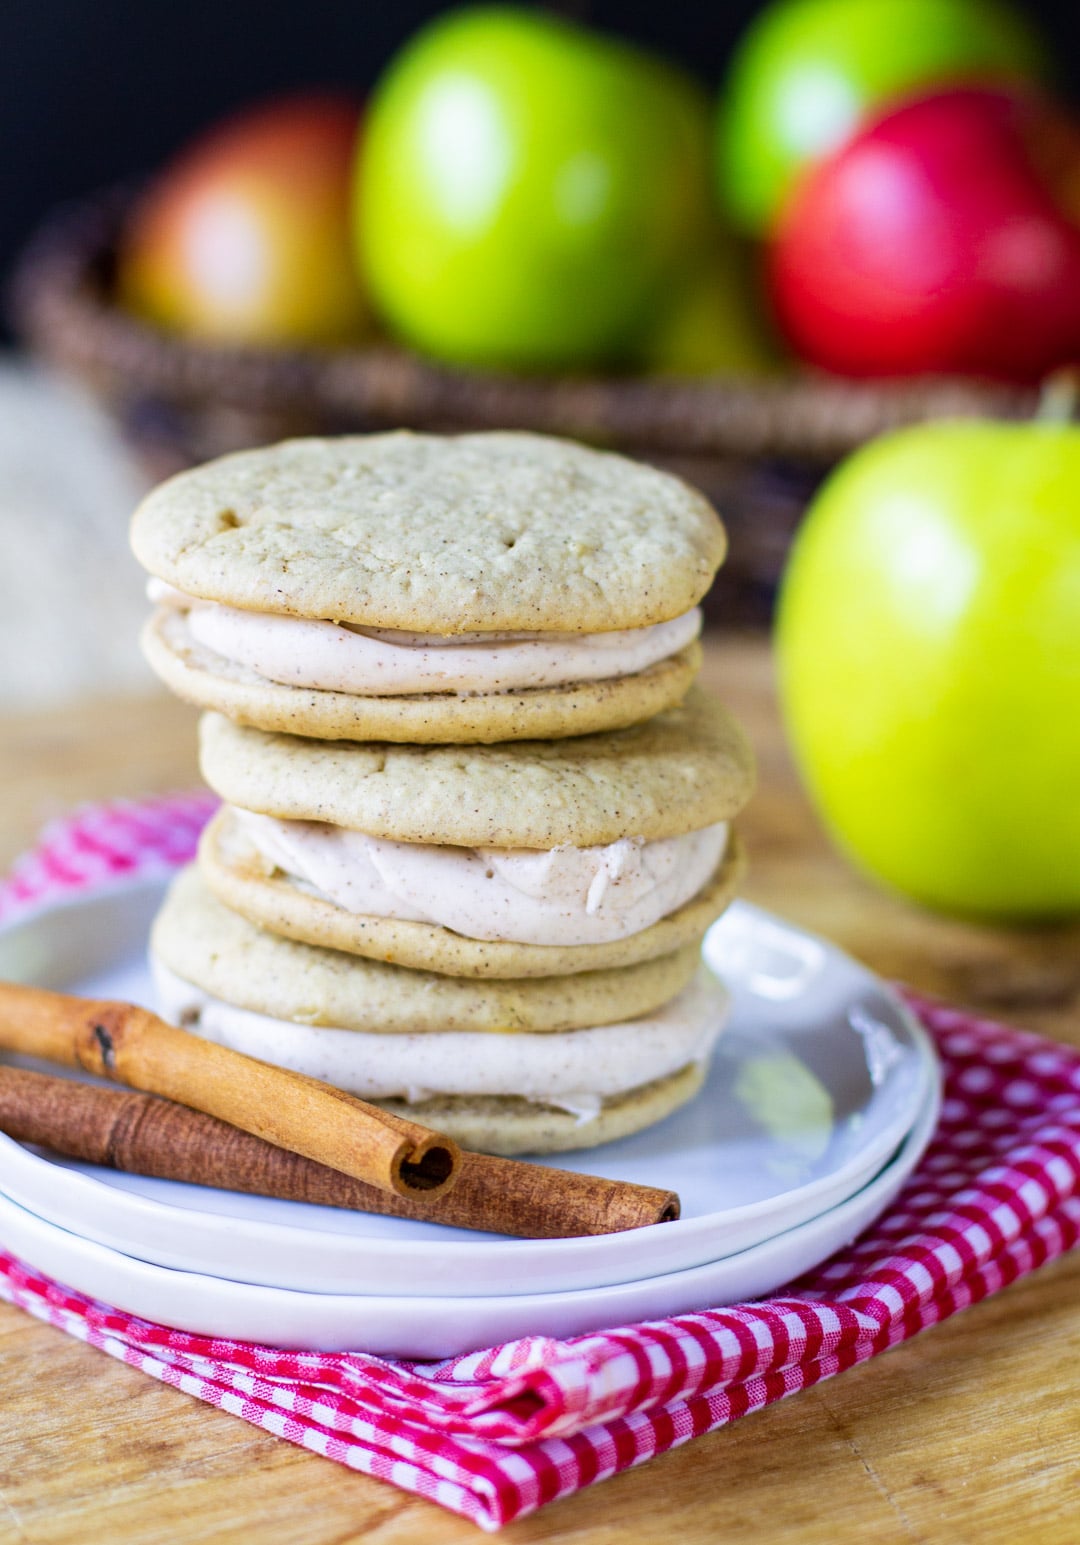 Apple Pie Whoopie Pies stacked on a small plate.